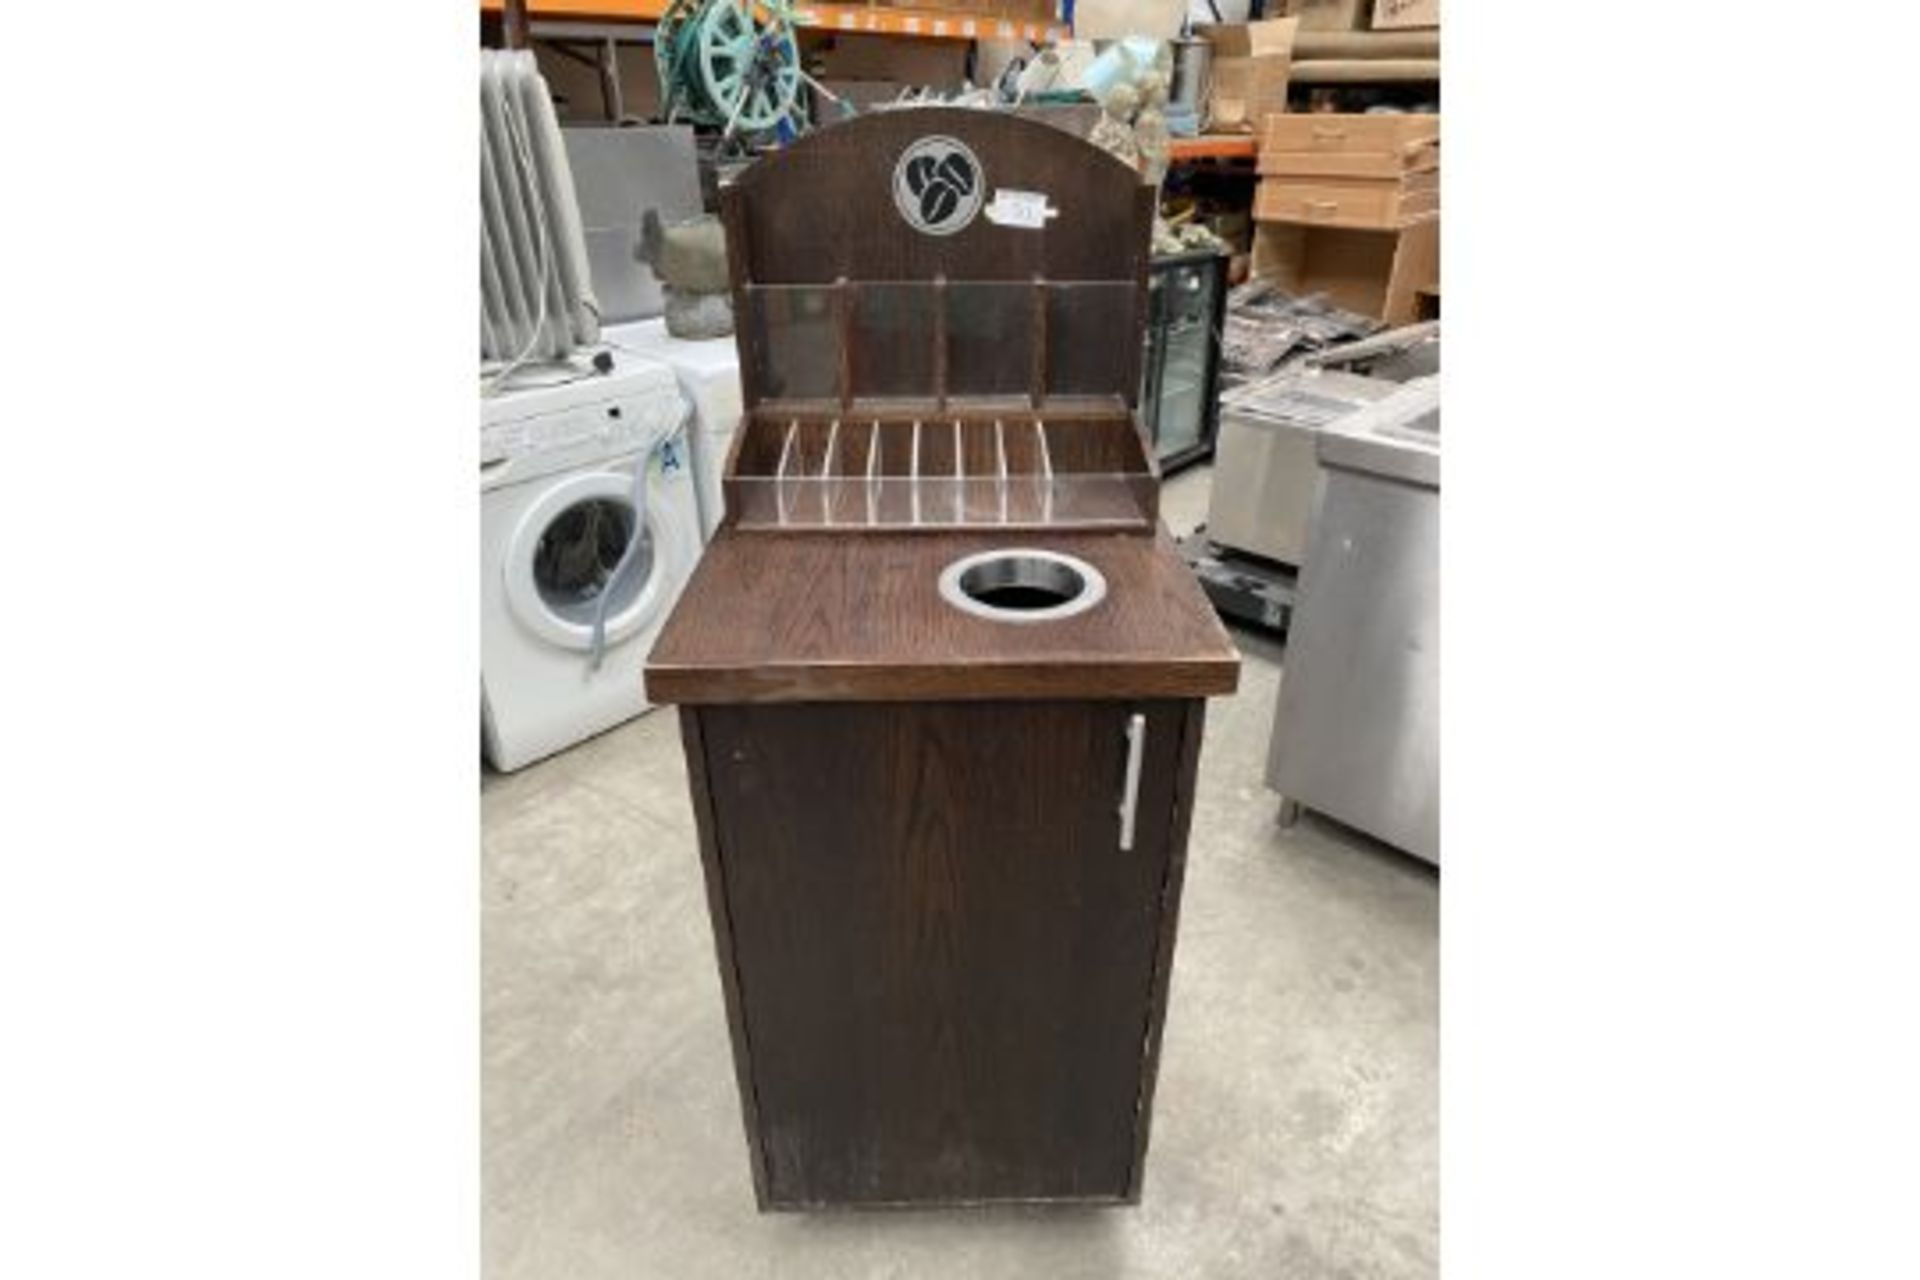 Dark wood Dumb Waiter for Condiments and waste